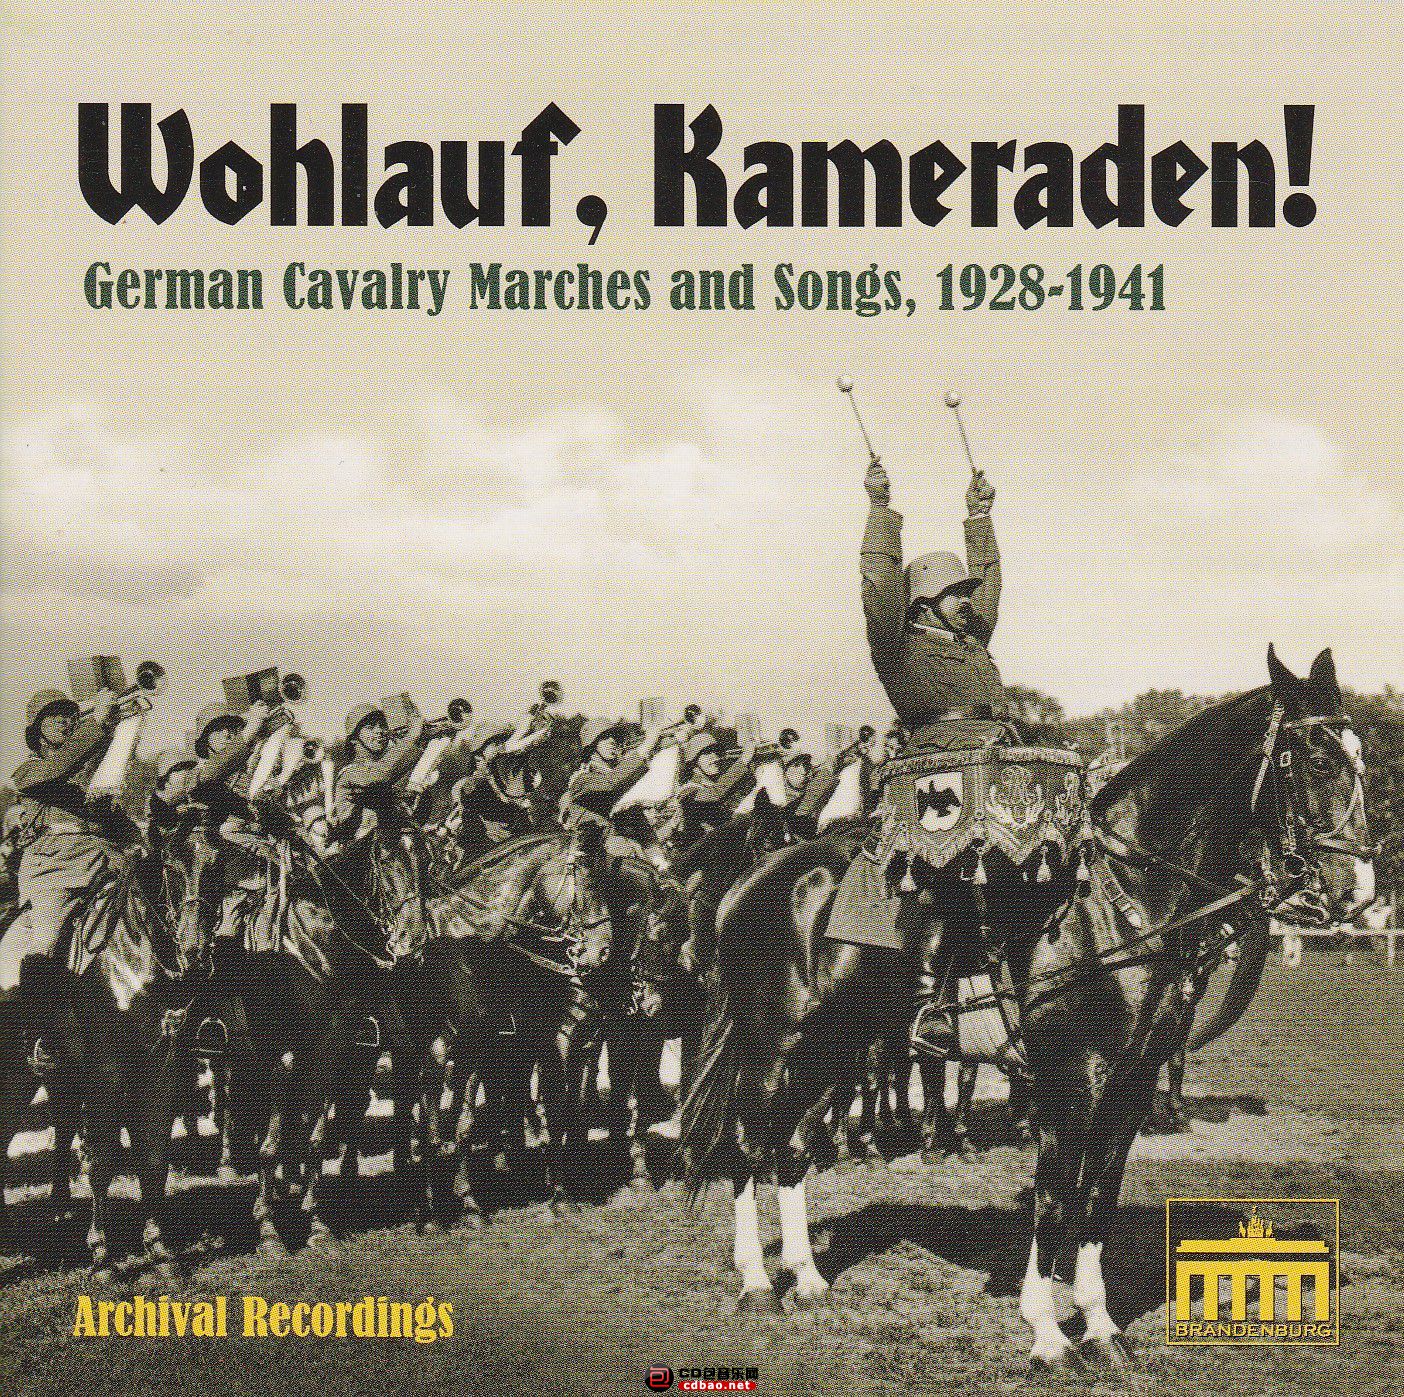 Wohlauf, Kameraden! German Cavalry Marches and Songs, 1928-1941 (1).jpg